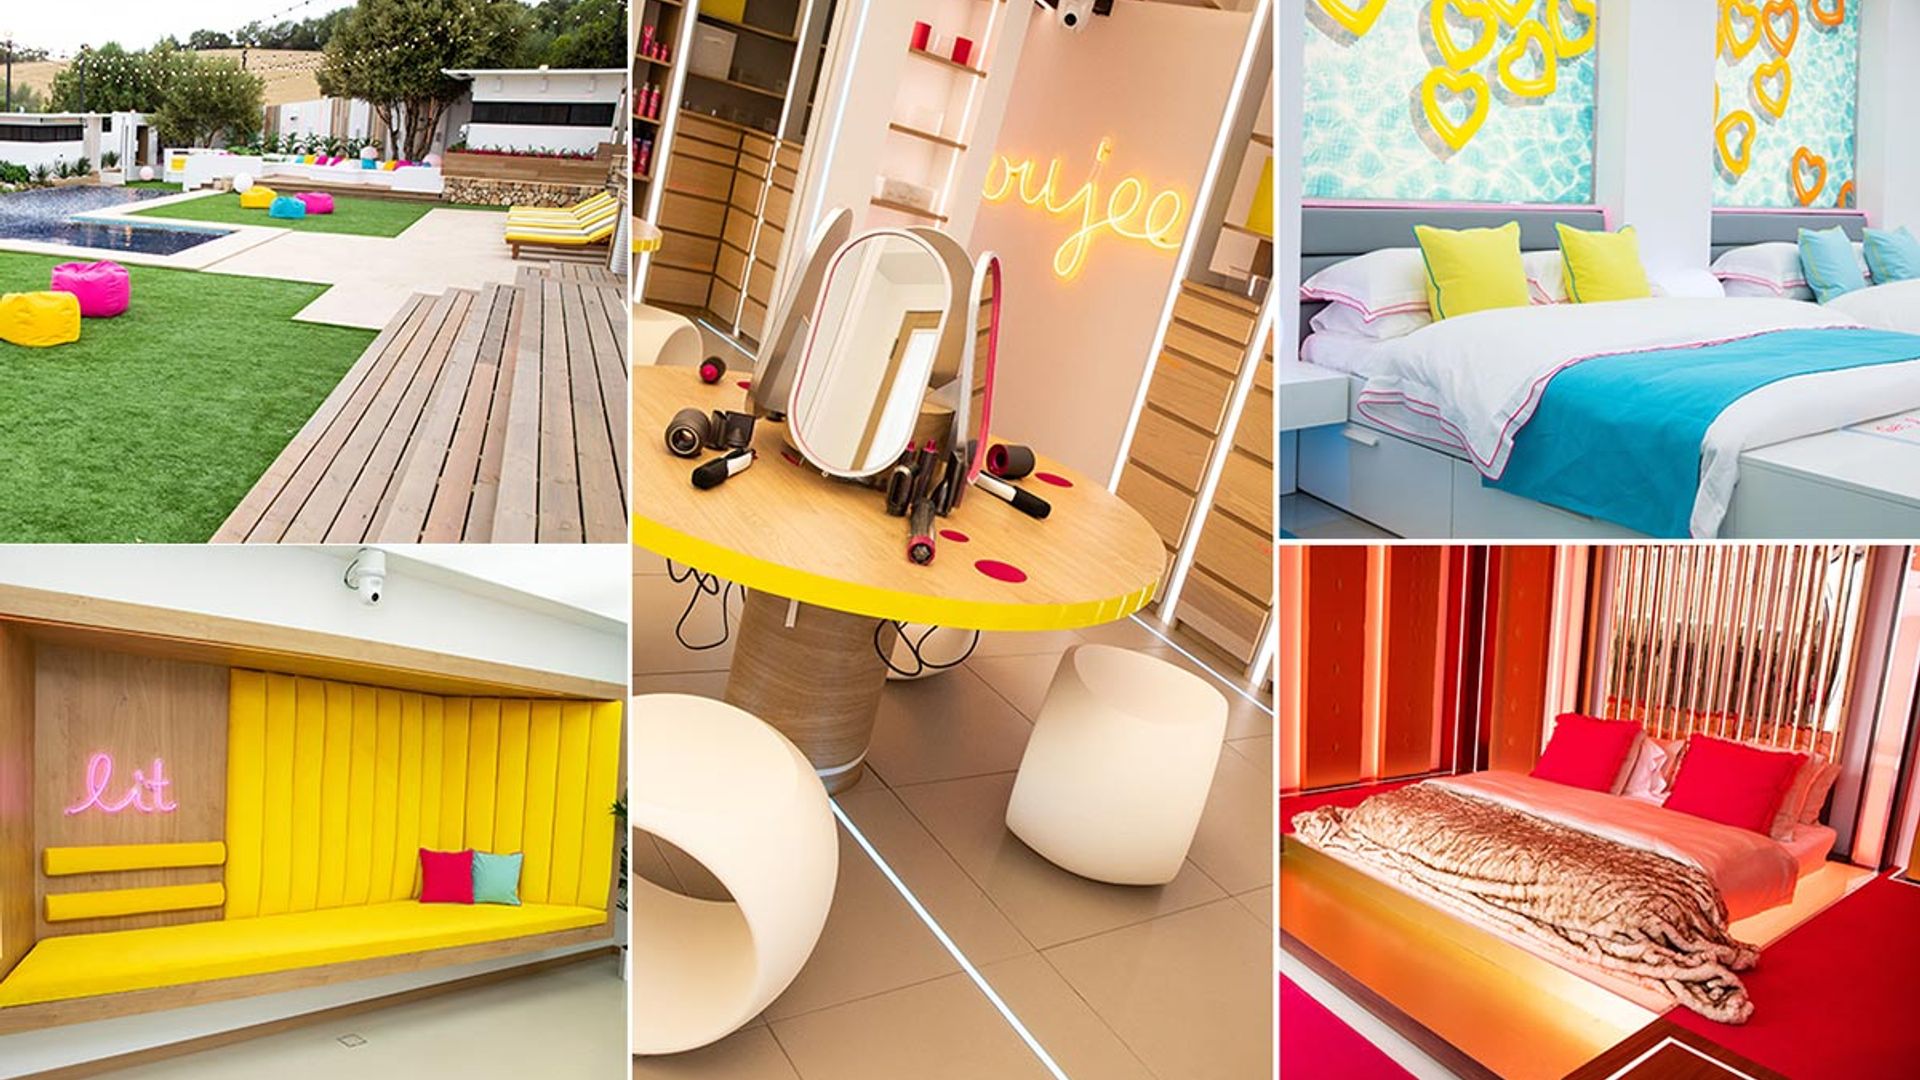 The Marks & Spencer homeware you might have missed on Love Island